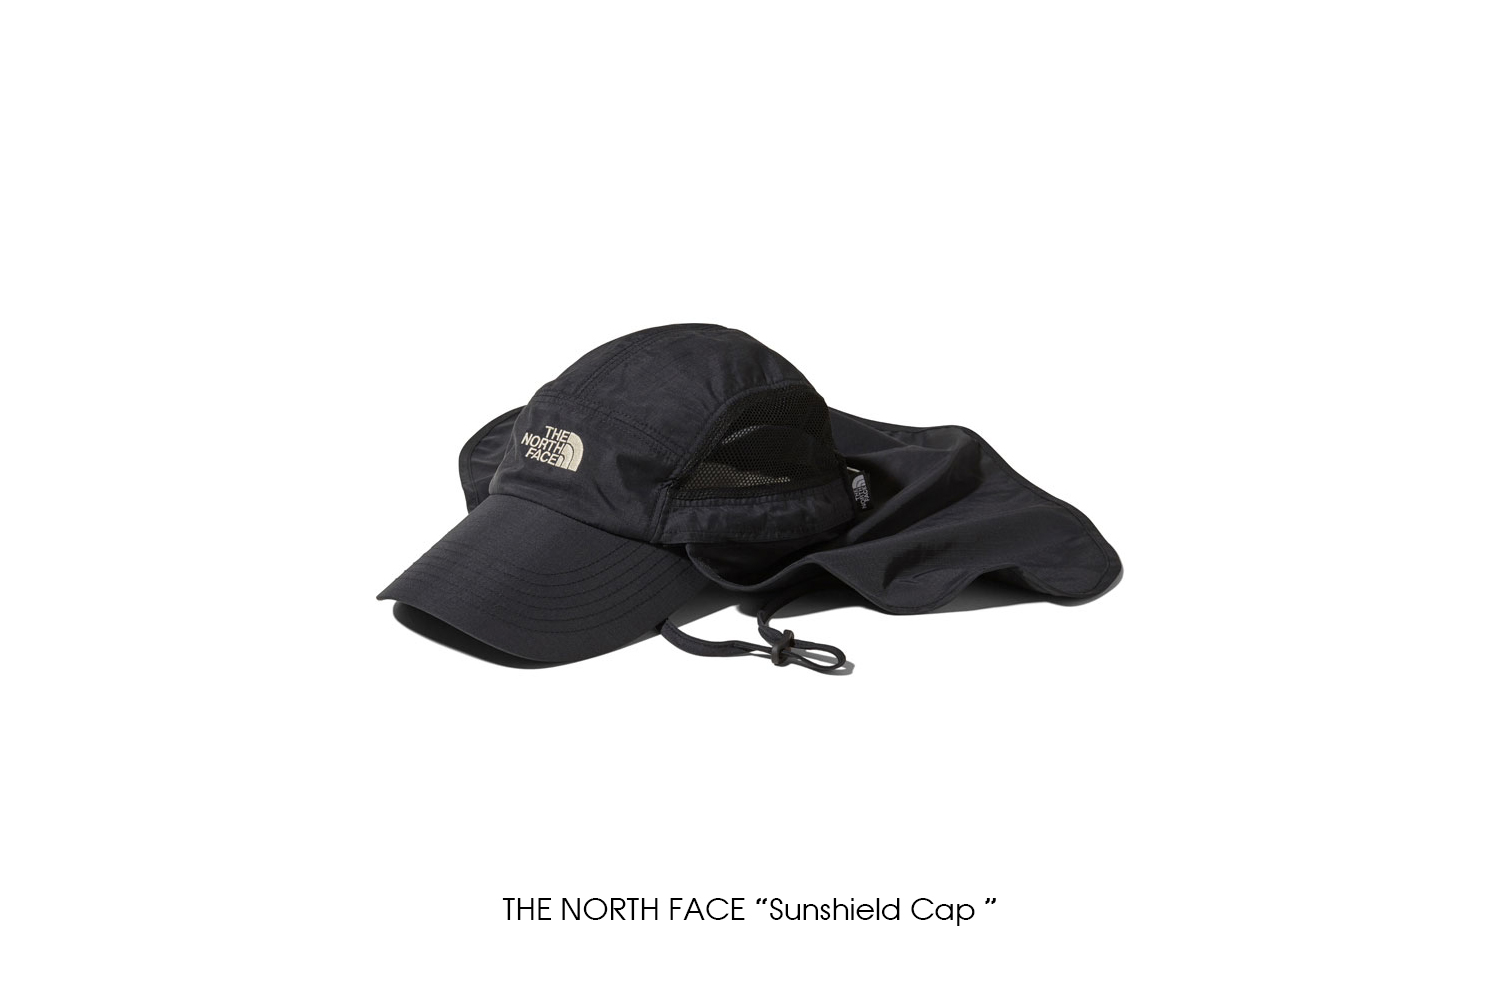 THE NORTH FACE "Sunshield Cap"